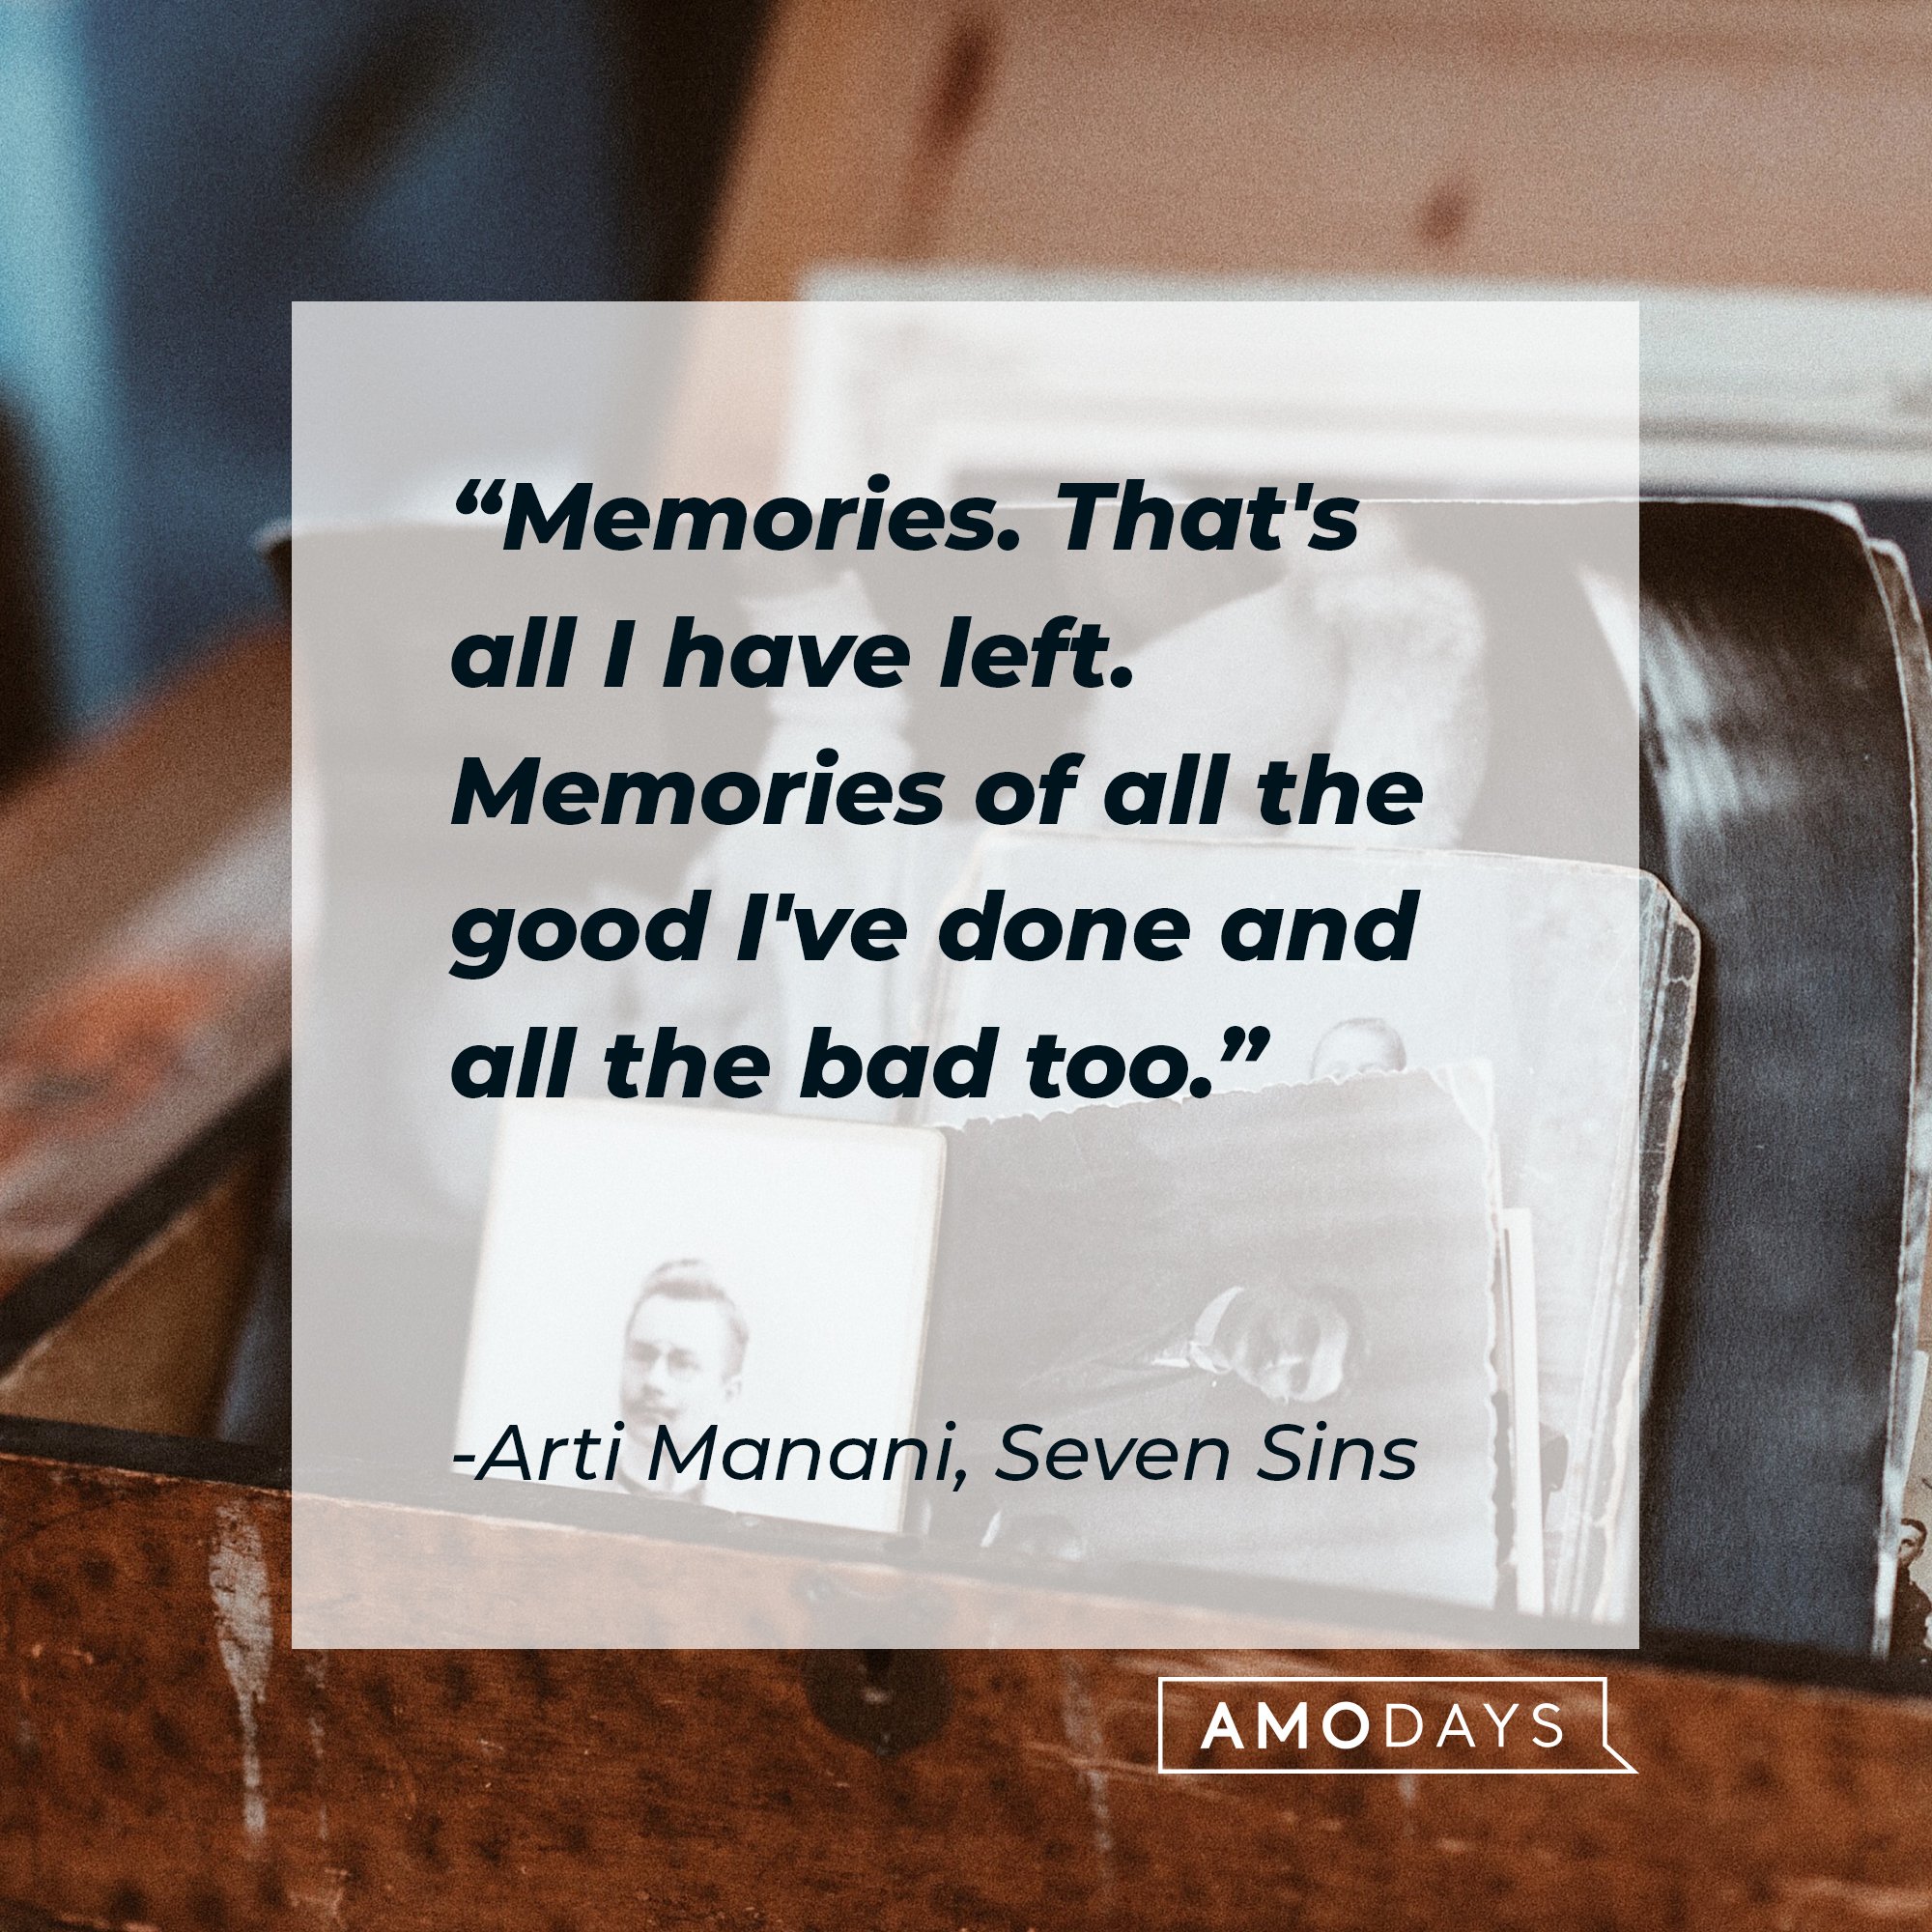 Arti Manan’s quote: "Memories. That's all I have left. Memories of all the good I've done and all the bad too." | Image: AmoDays